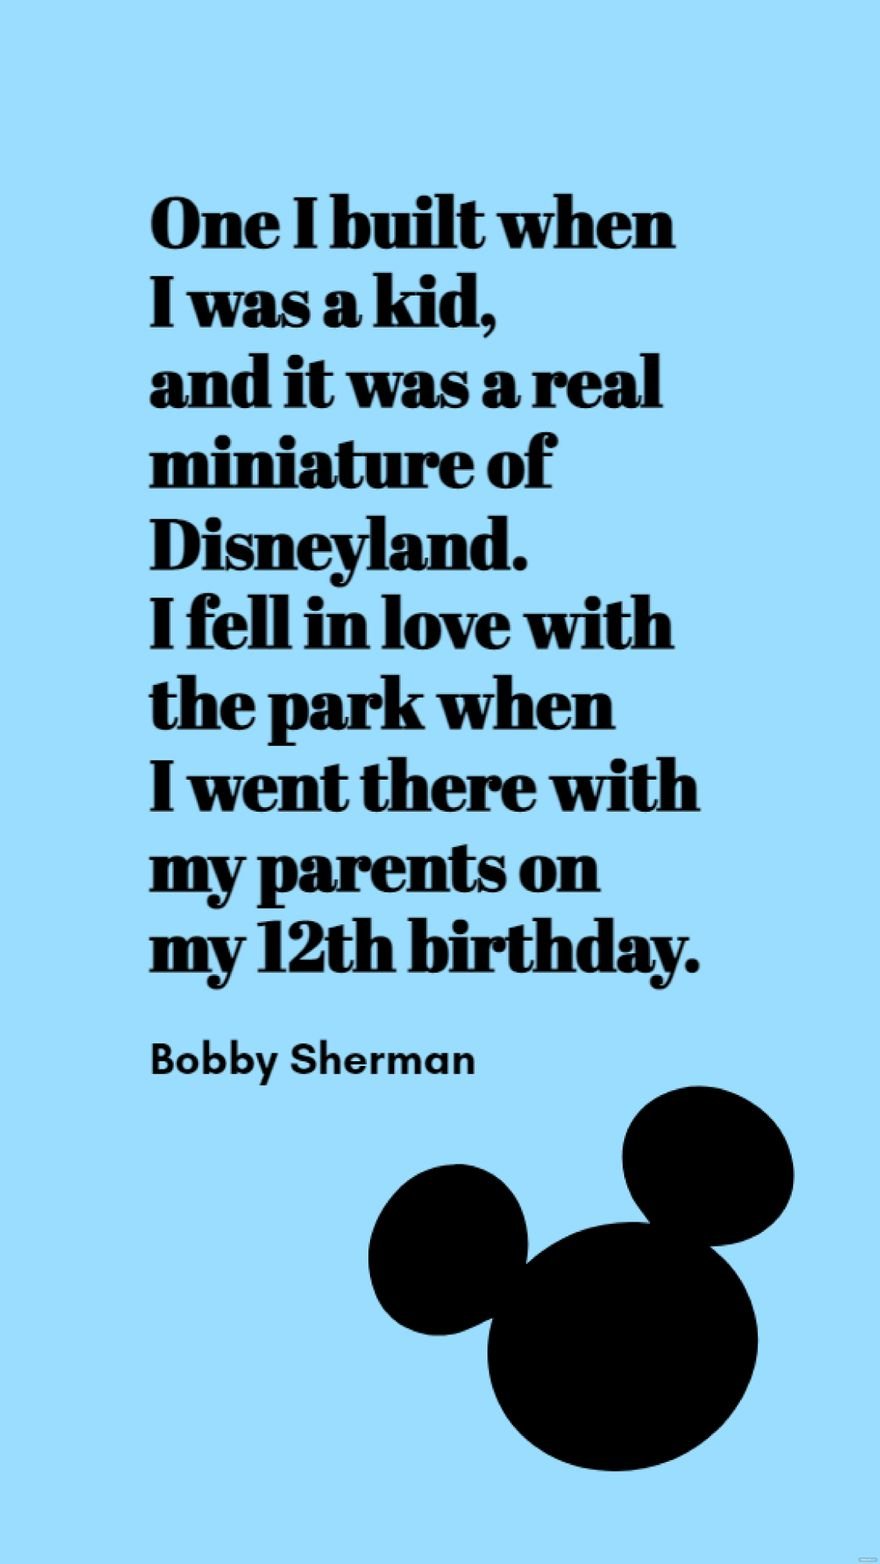 Free Bobby Sherman - One I built when I was a kid, and it was a real miniature of Disneyland. I fell in love with the park when I went there with my parents on my 12th birthday.